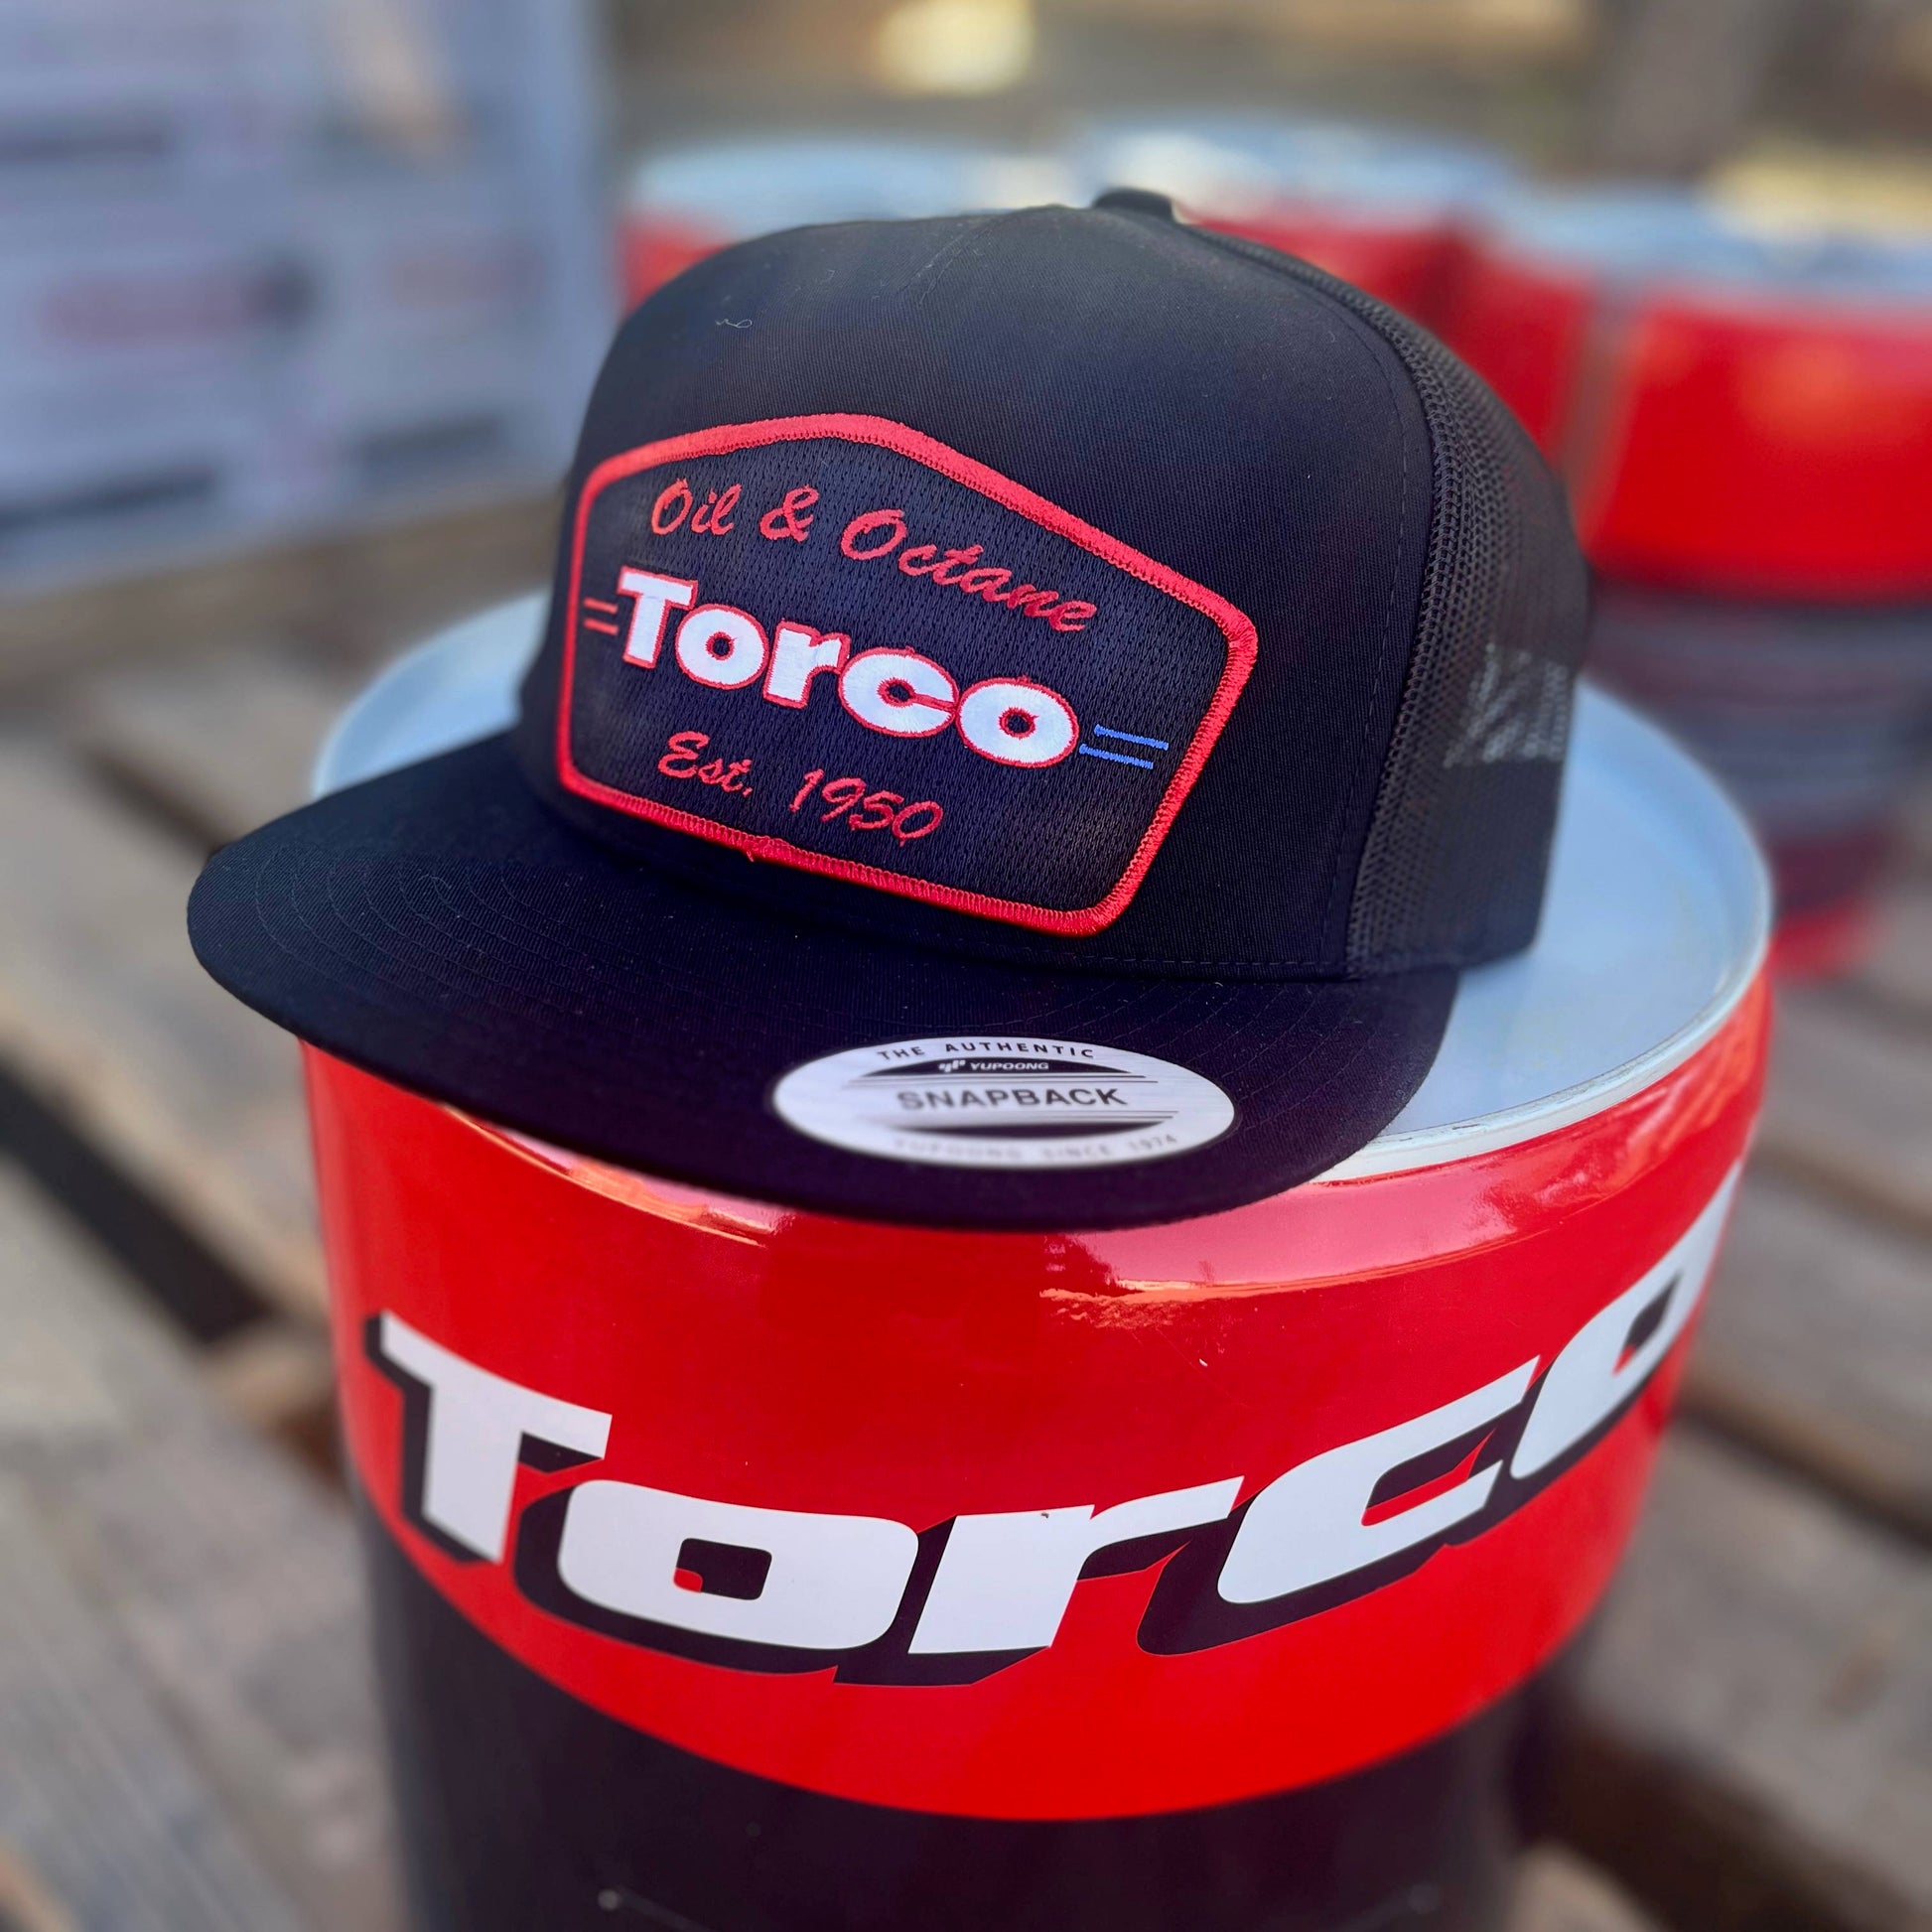 Torco Oil and Octane Snapback hat